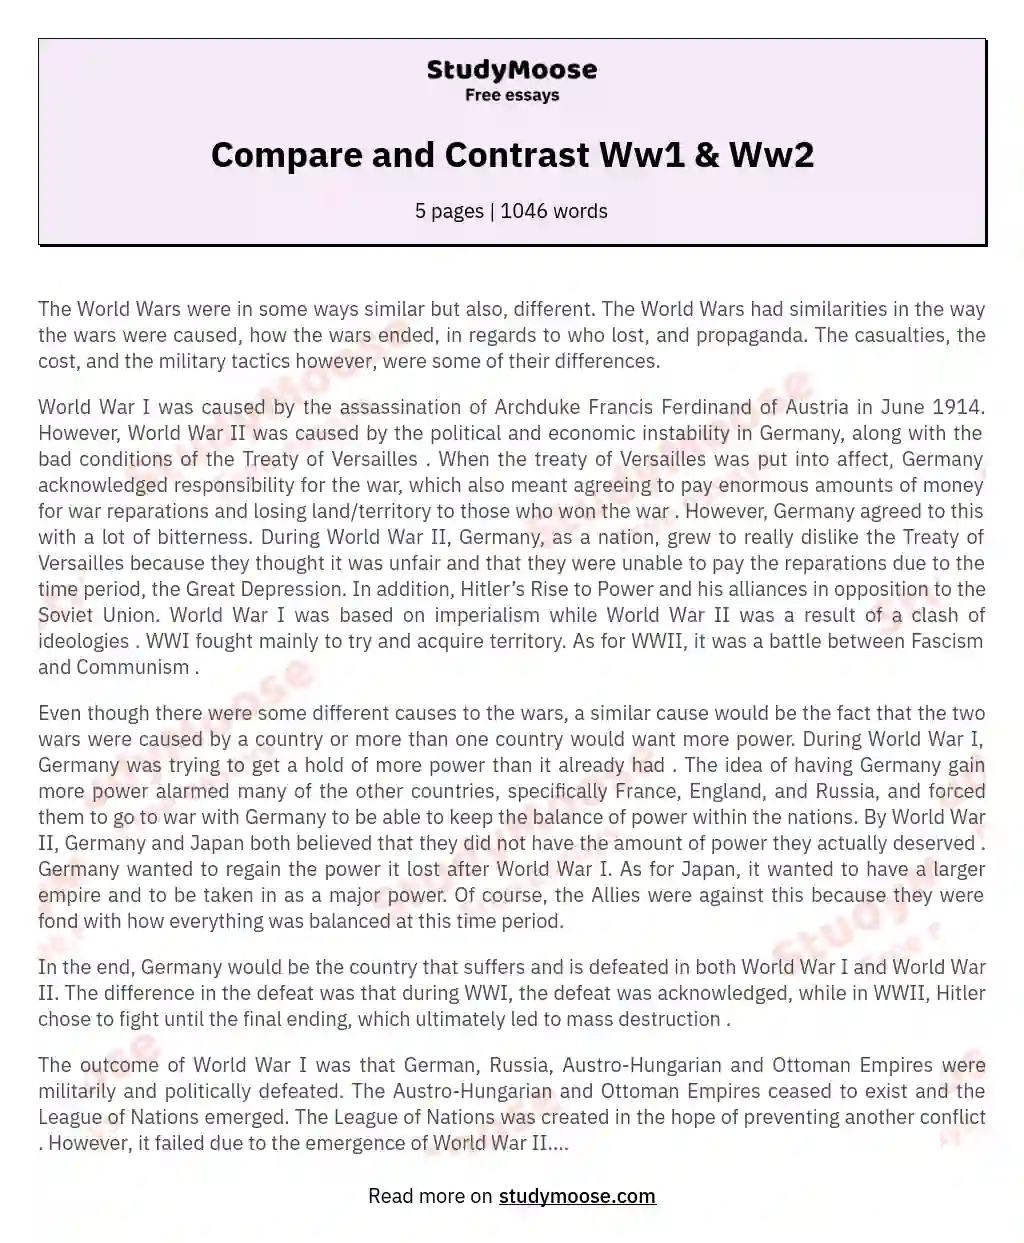 ww1 and ww2 compare and contrast essay